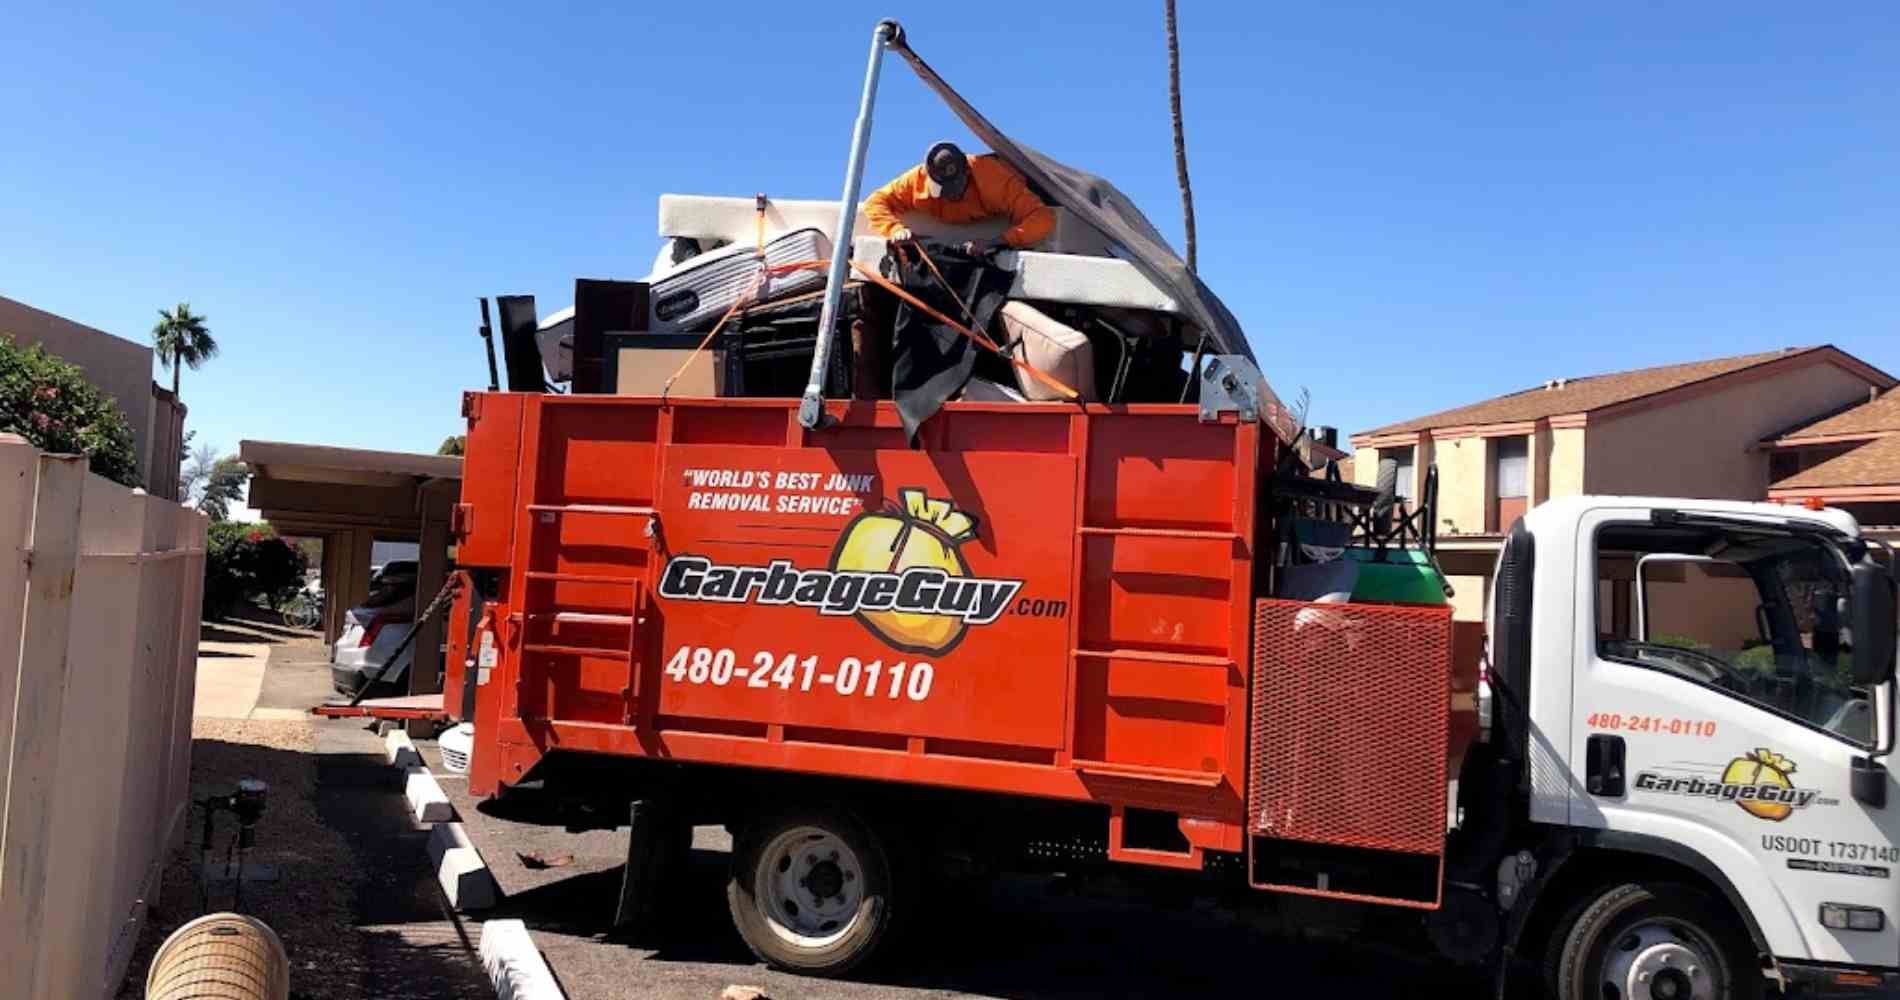 #1 for Furniture Removal in Sun City, AZ With Over 1200 5-Star Reviews!